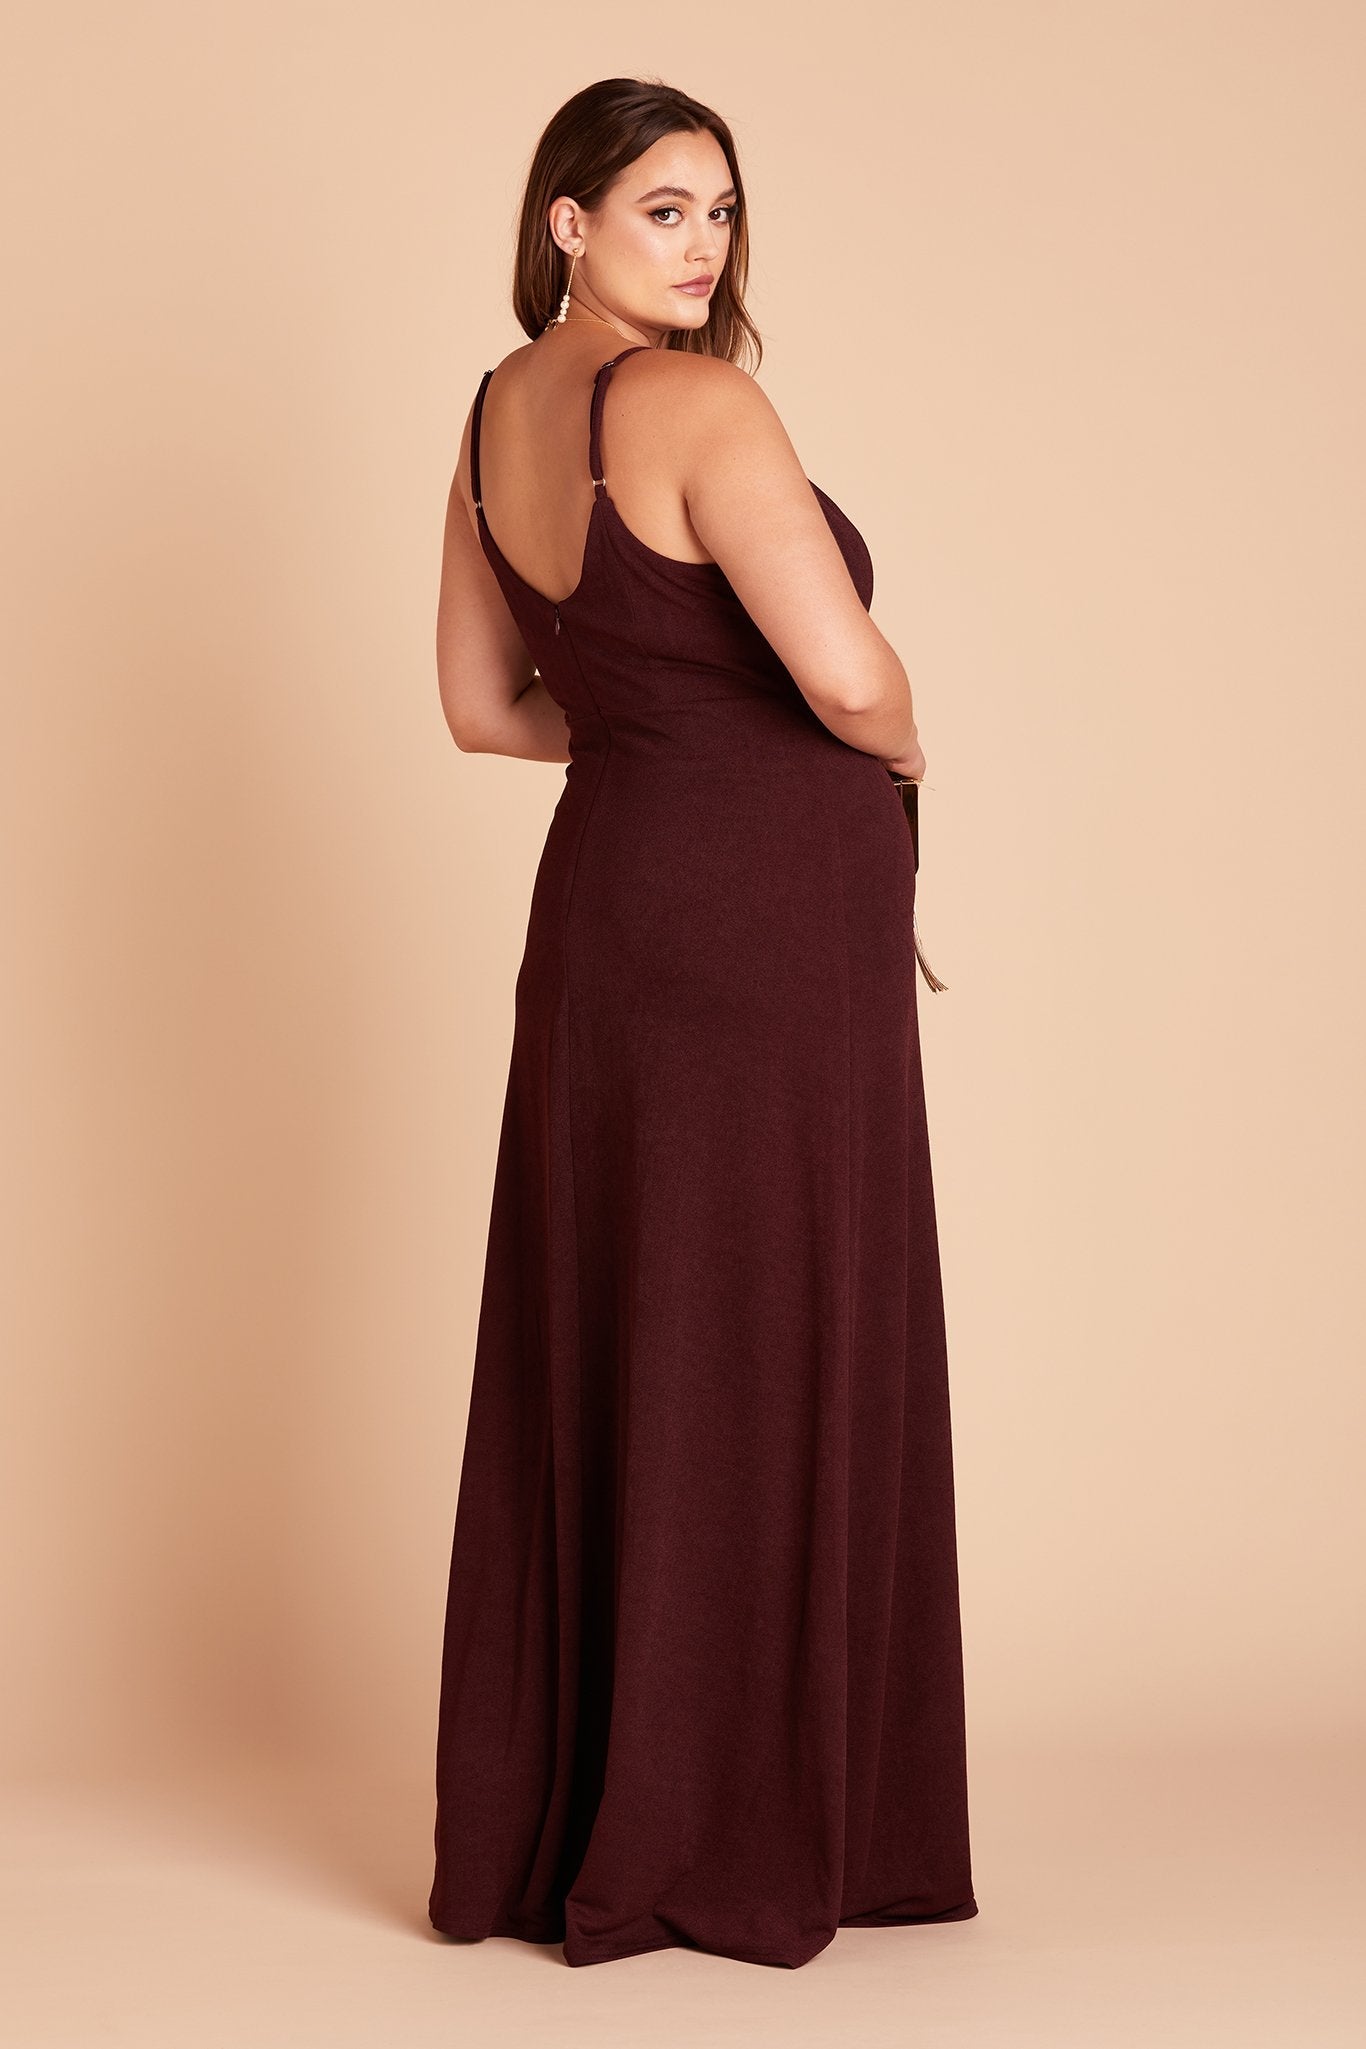 Jay plus size bridesmaid dress with slit in cabernet burgundy crepe by Birdy Grey, side view